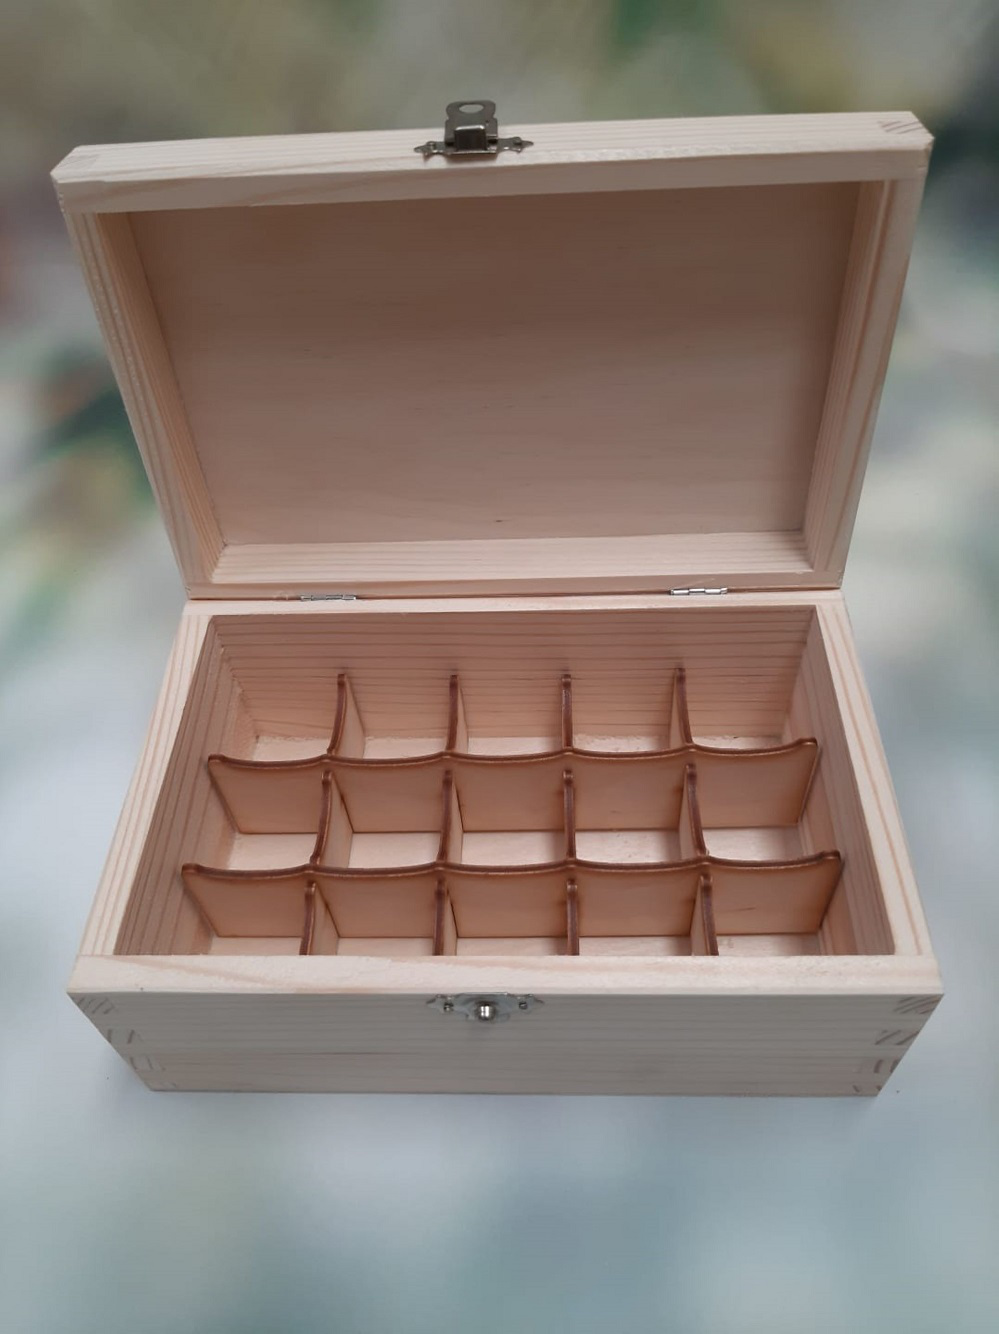 Small Wooden Pine Box With 15 Compartments Dividers Sections - Close Up